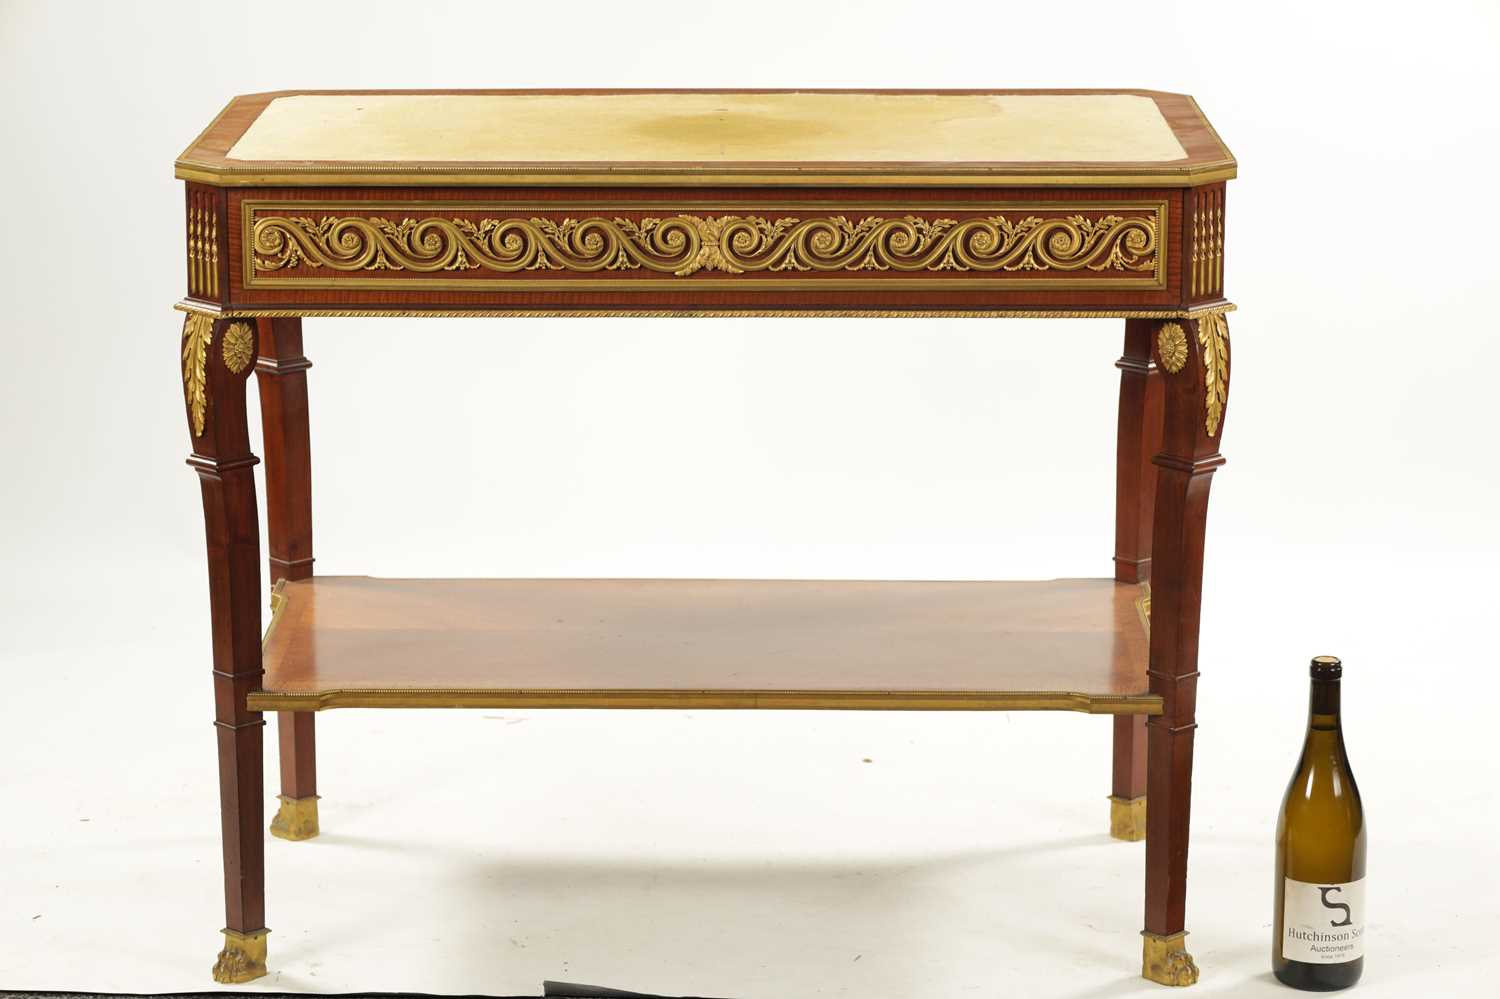 A FINE 19TH CENTURY ENGLISH MADE FRENCH EMPIRE STYLE FIDDLEBACK MAHOGANY AND ORMOLU MOUNTED WRITING - Image 3 of 6